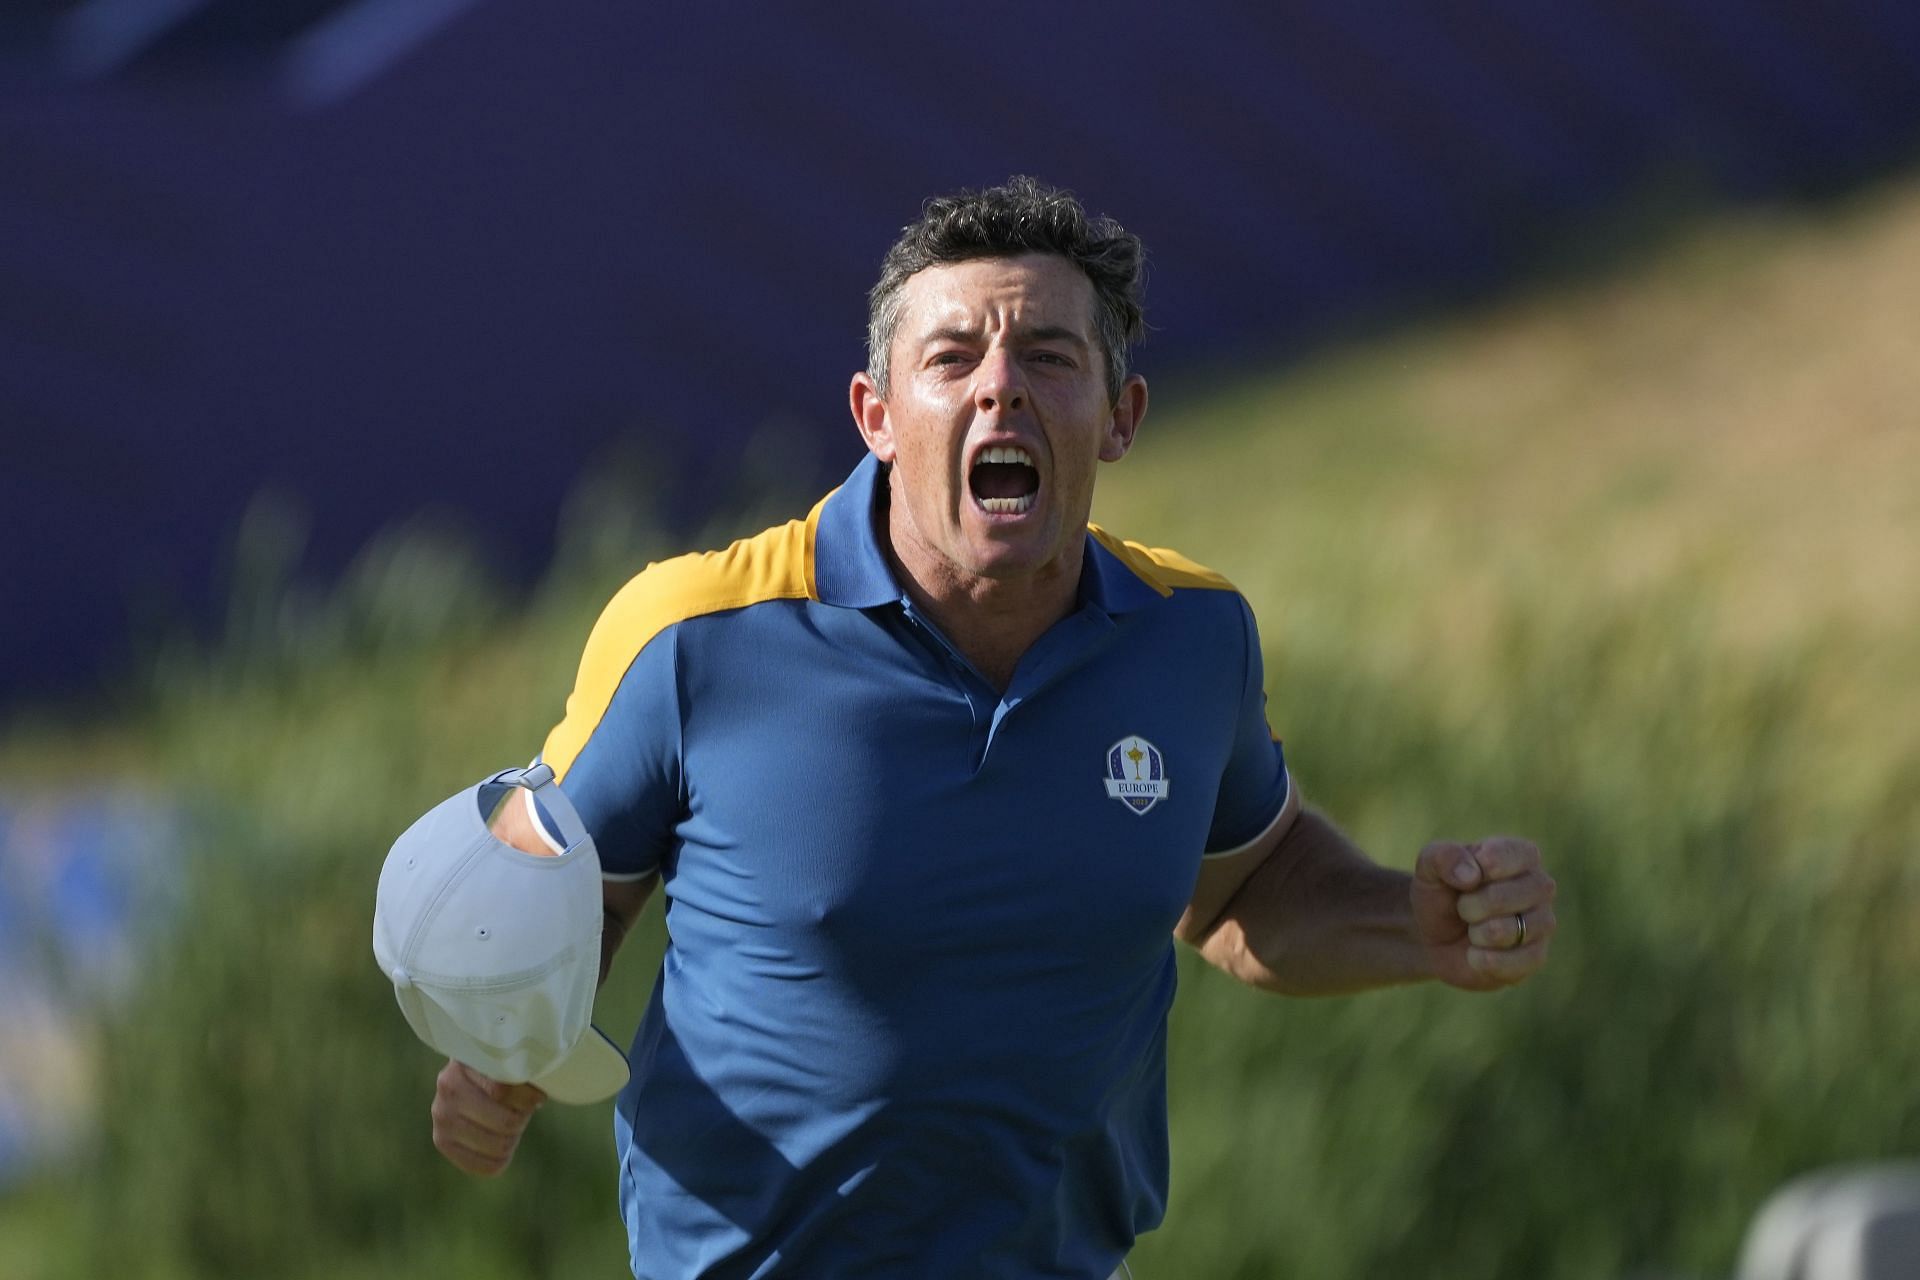 Rory McIlroy went 4-1 at the Ryder Cup